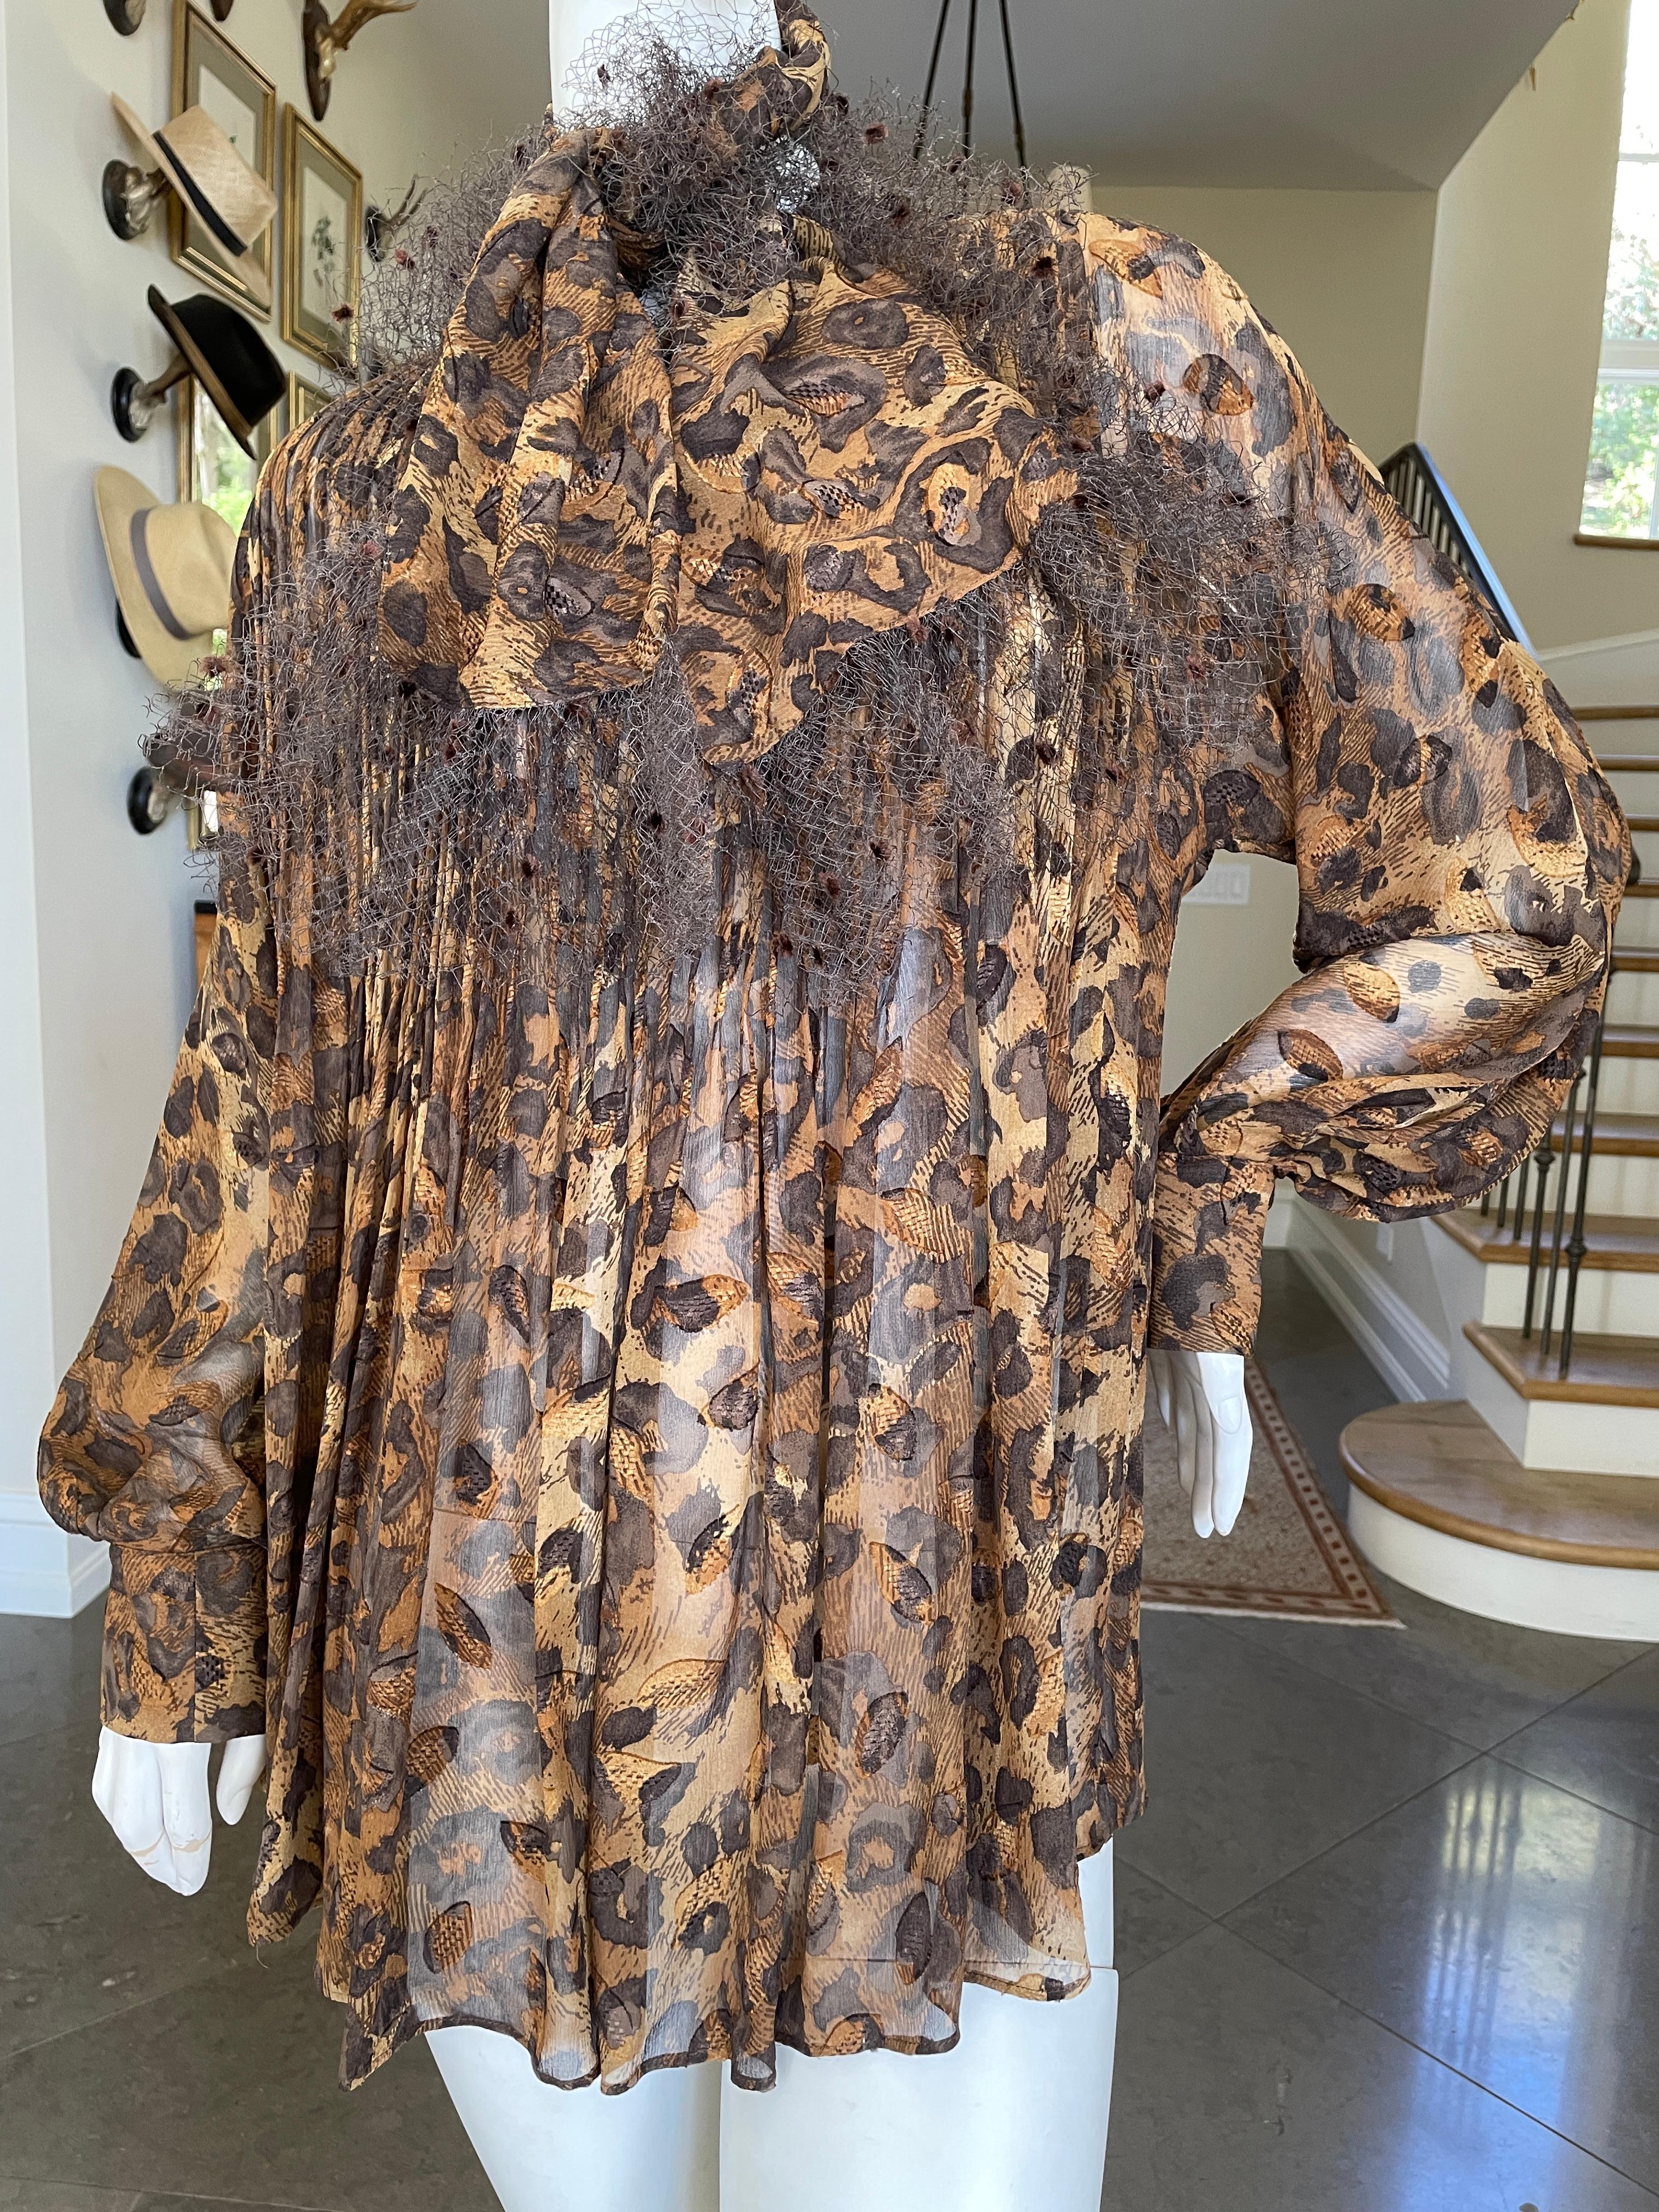  Gianfranco Ferre Vintage Sheer Pleated Leopard Print Silk Blouse with
 Lace Trimmed Separate Scarf.
This is an exceptional piece, Ferre was such a talent, and his blouses were his signature .
 Size 42
Bust 38